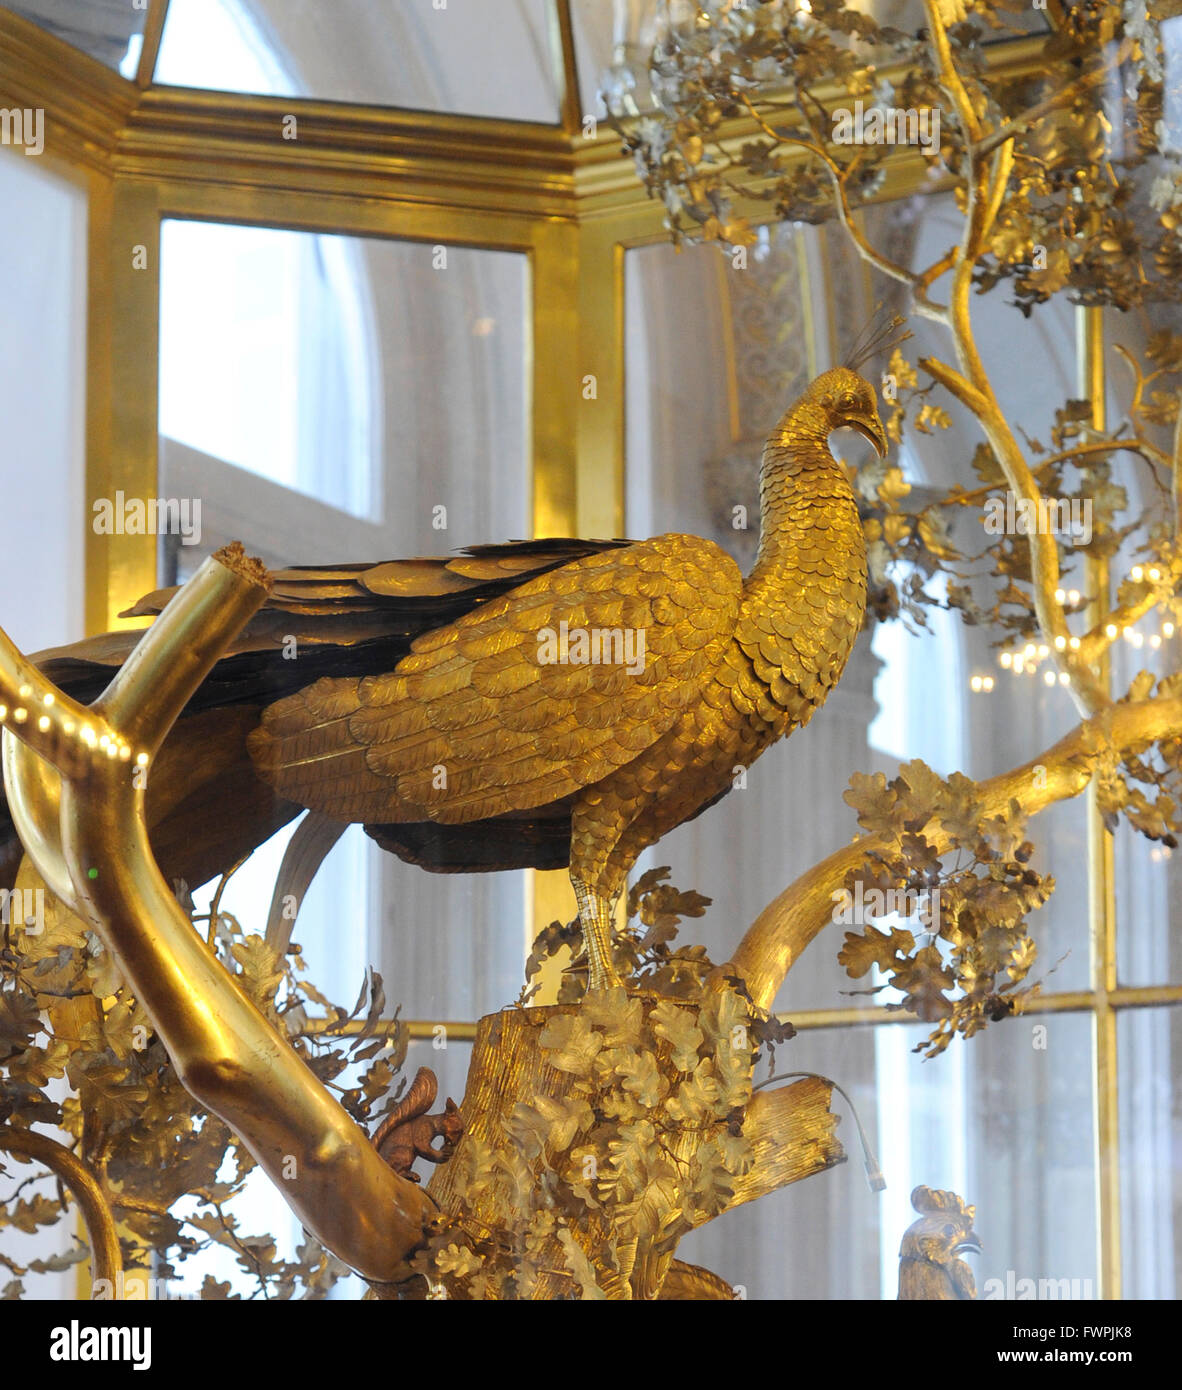 The Peacock Clock. Mechanical clock built by James Cox (c.1723-1800). 1770s. Gilded bronze. Pavilion Hall. Small Hermitage. The State Hermitage Museum. Saint Petersburg. Russia. Stock Photo